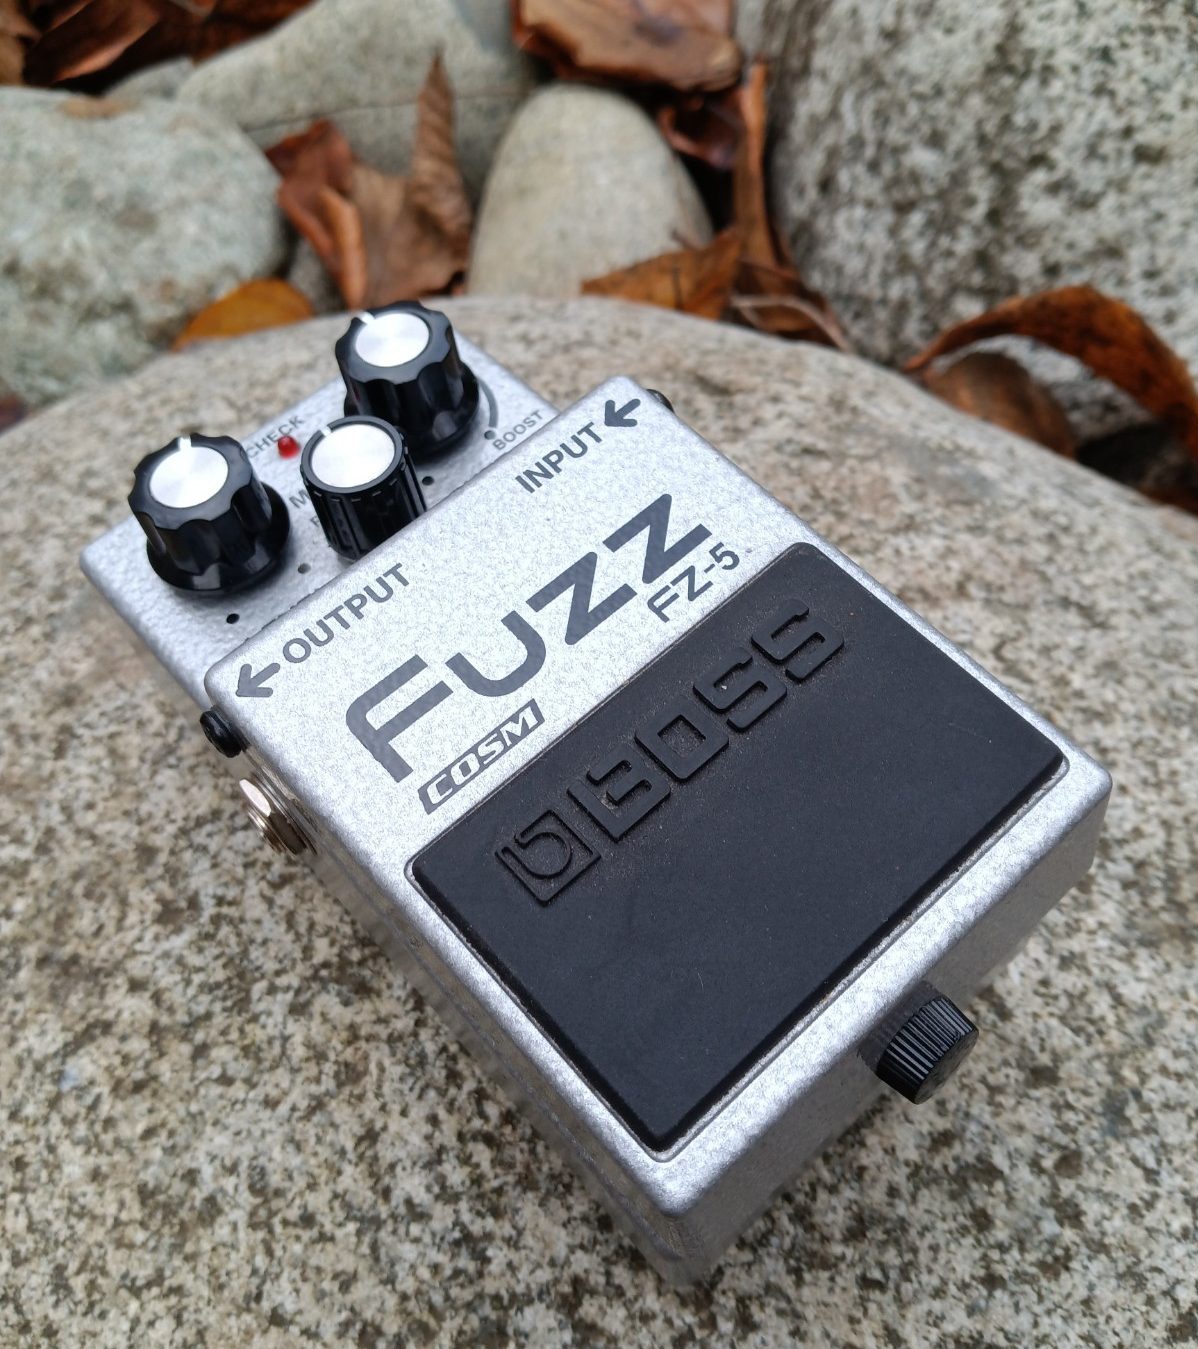 What the Fuzz? The Origins of BOSS Fuzz Pedals - BOSS Articles